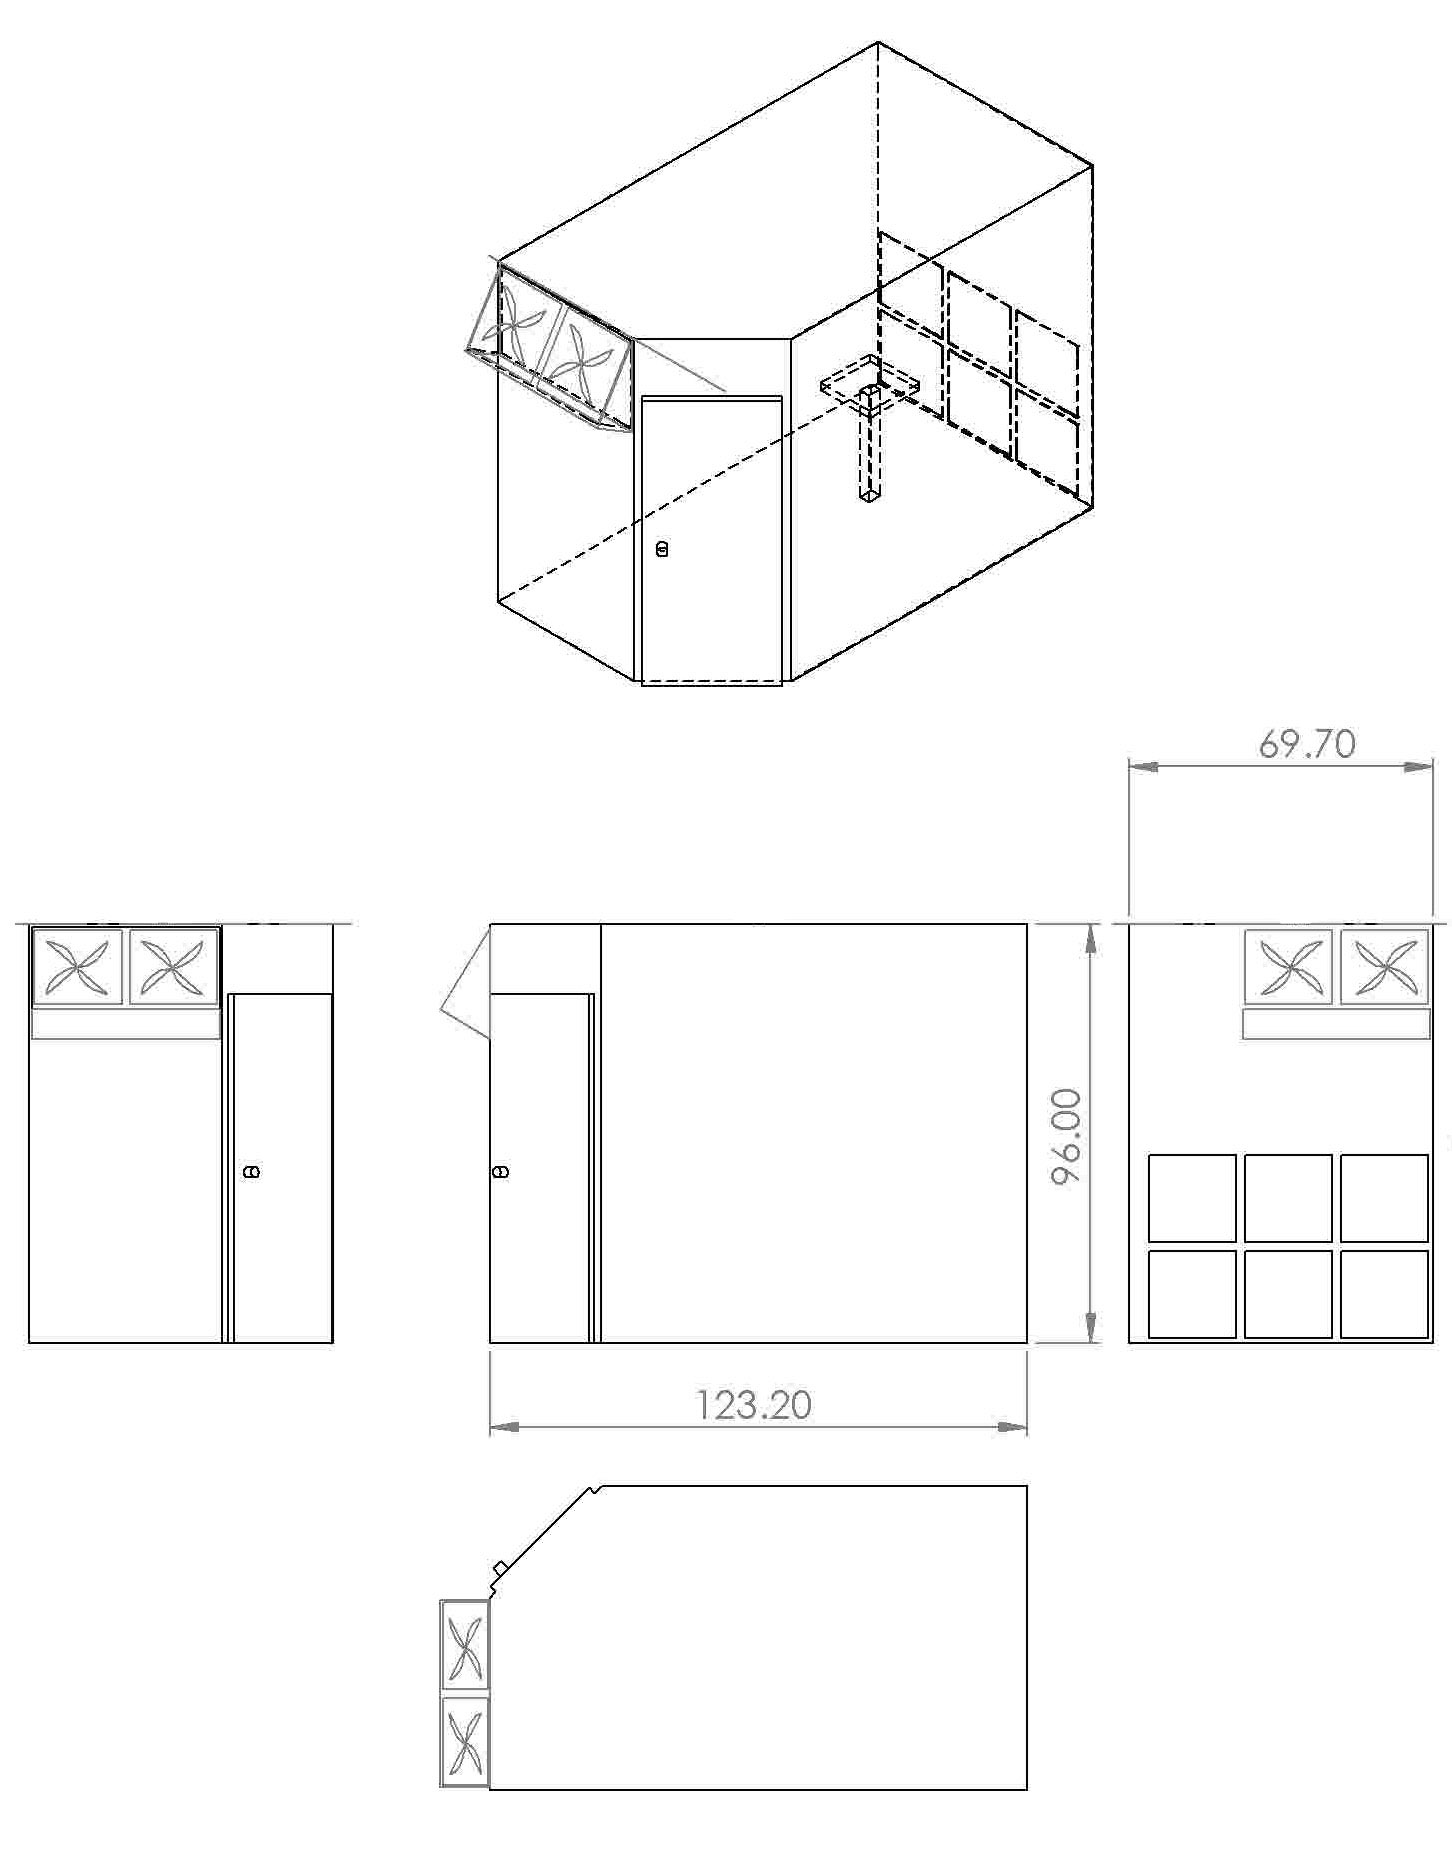 Plans for the paint booth